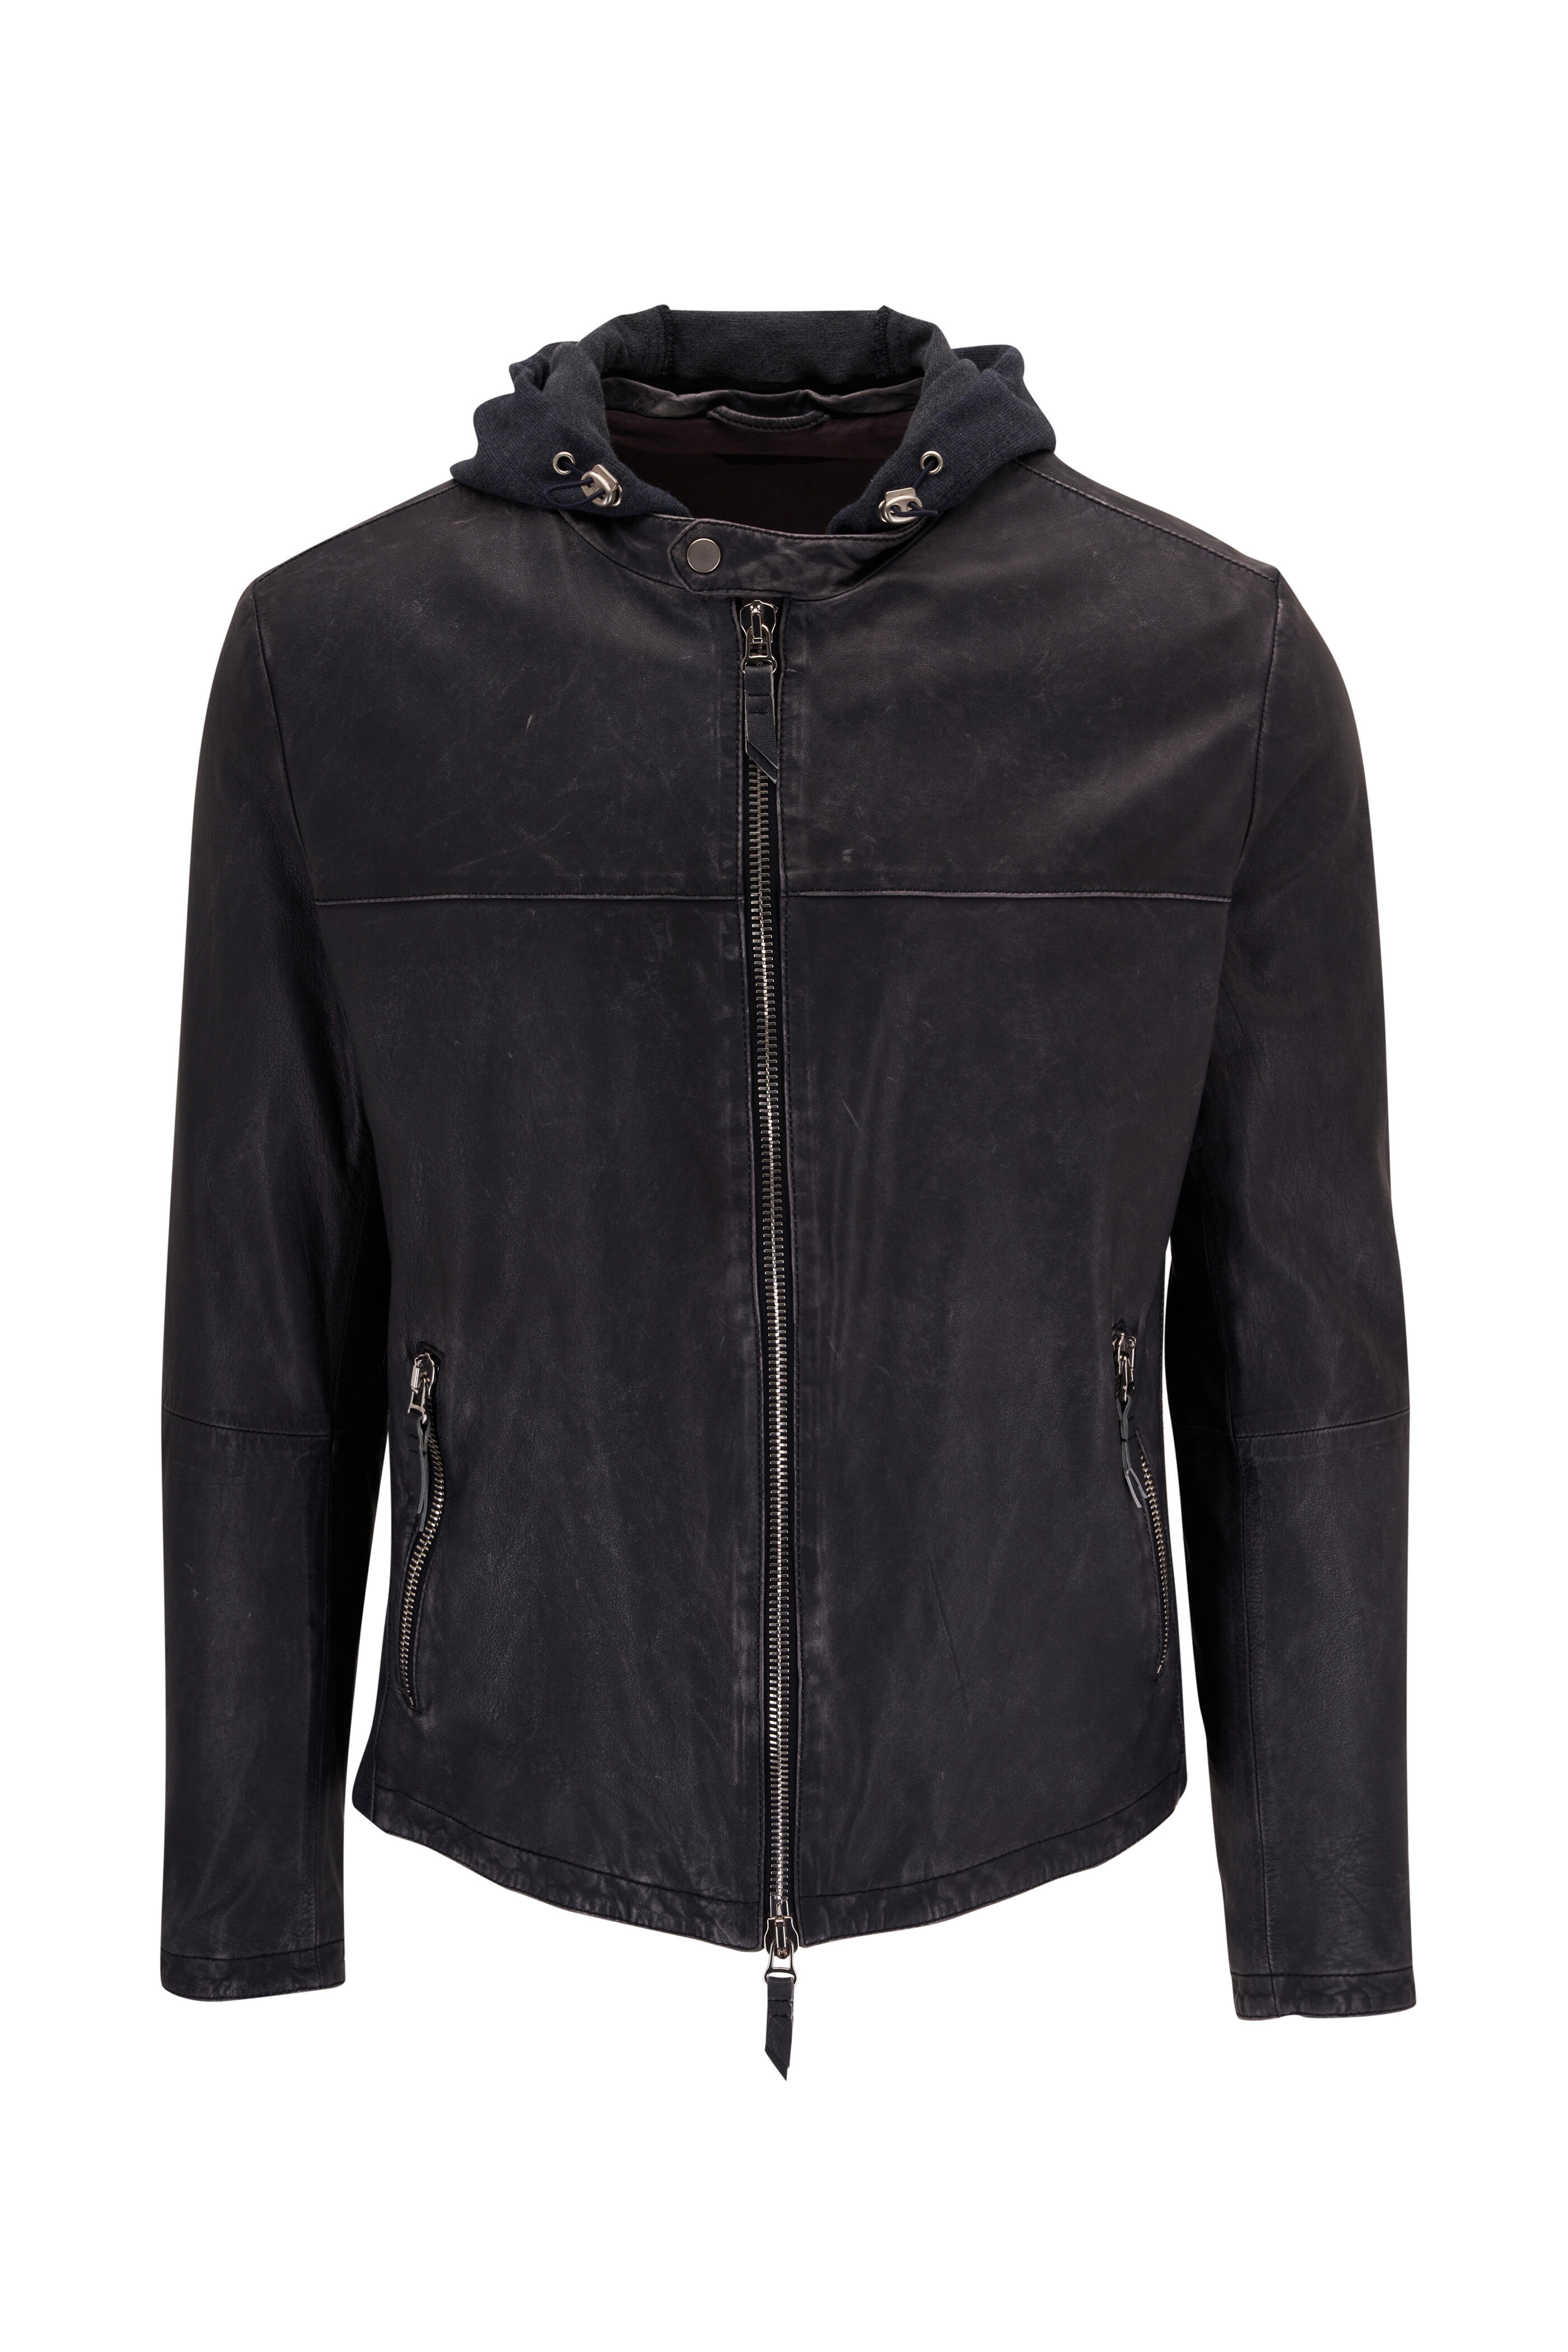 Gimos - Black Nappa Leather Hooded Moto Jacket | Mitchell Stores